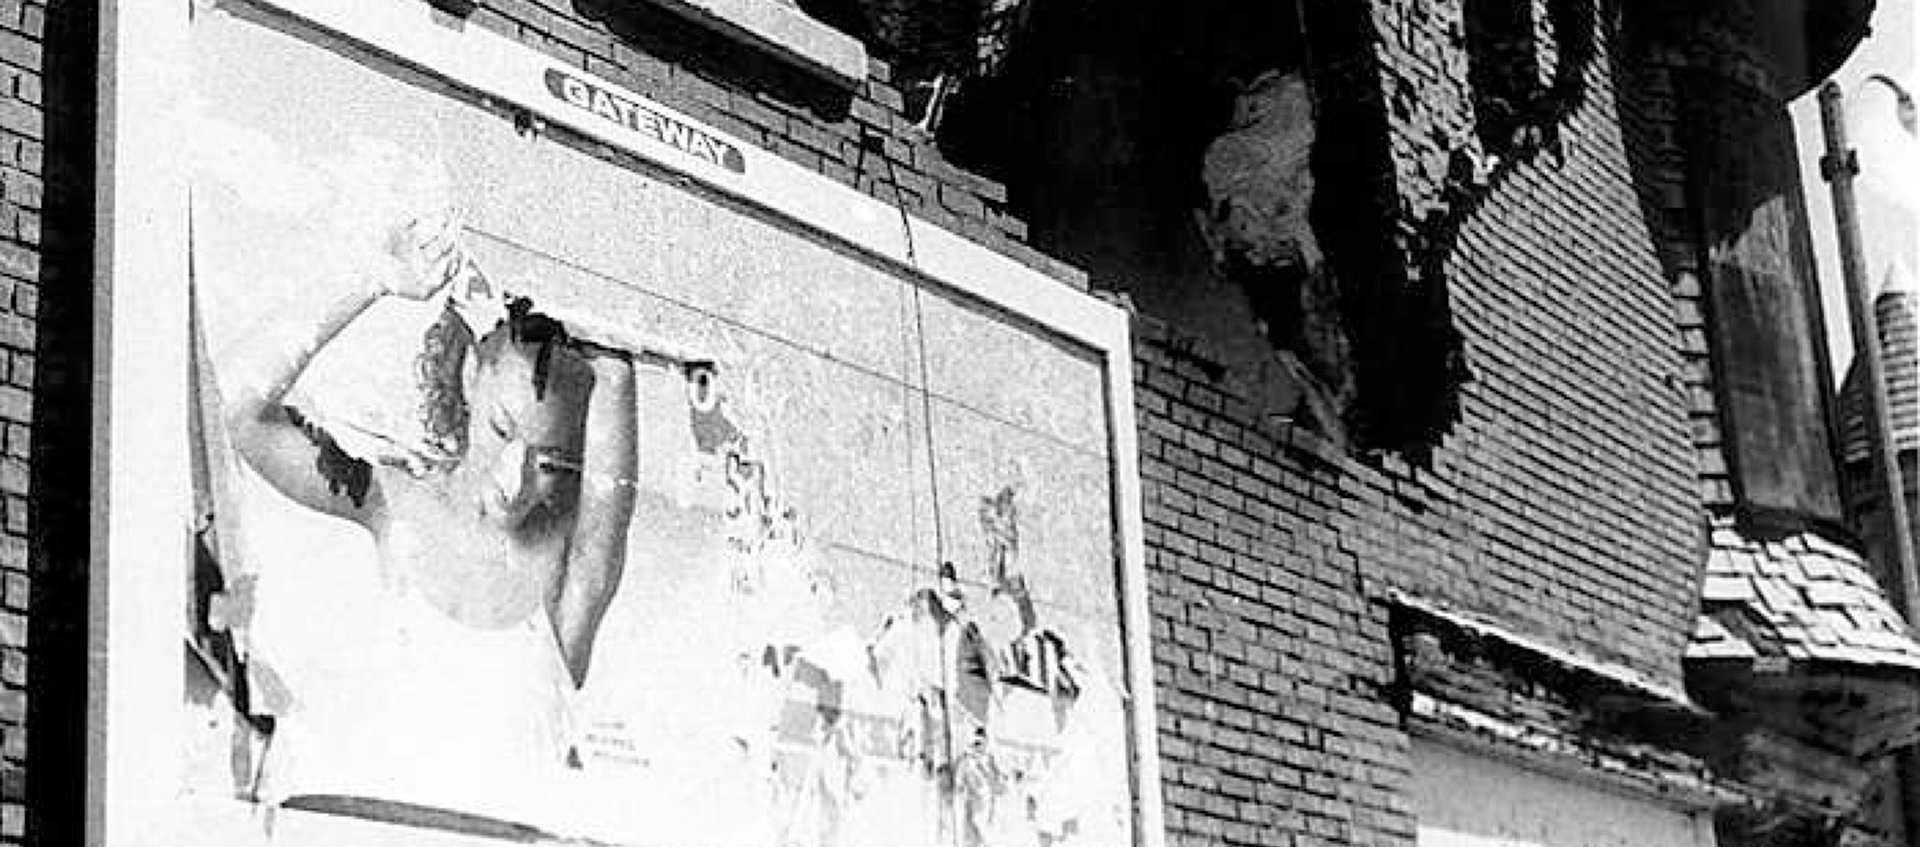 A black and white image of the front of a dilapidated brick building and a deteriorating billboard. 